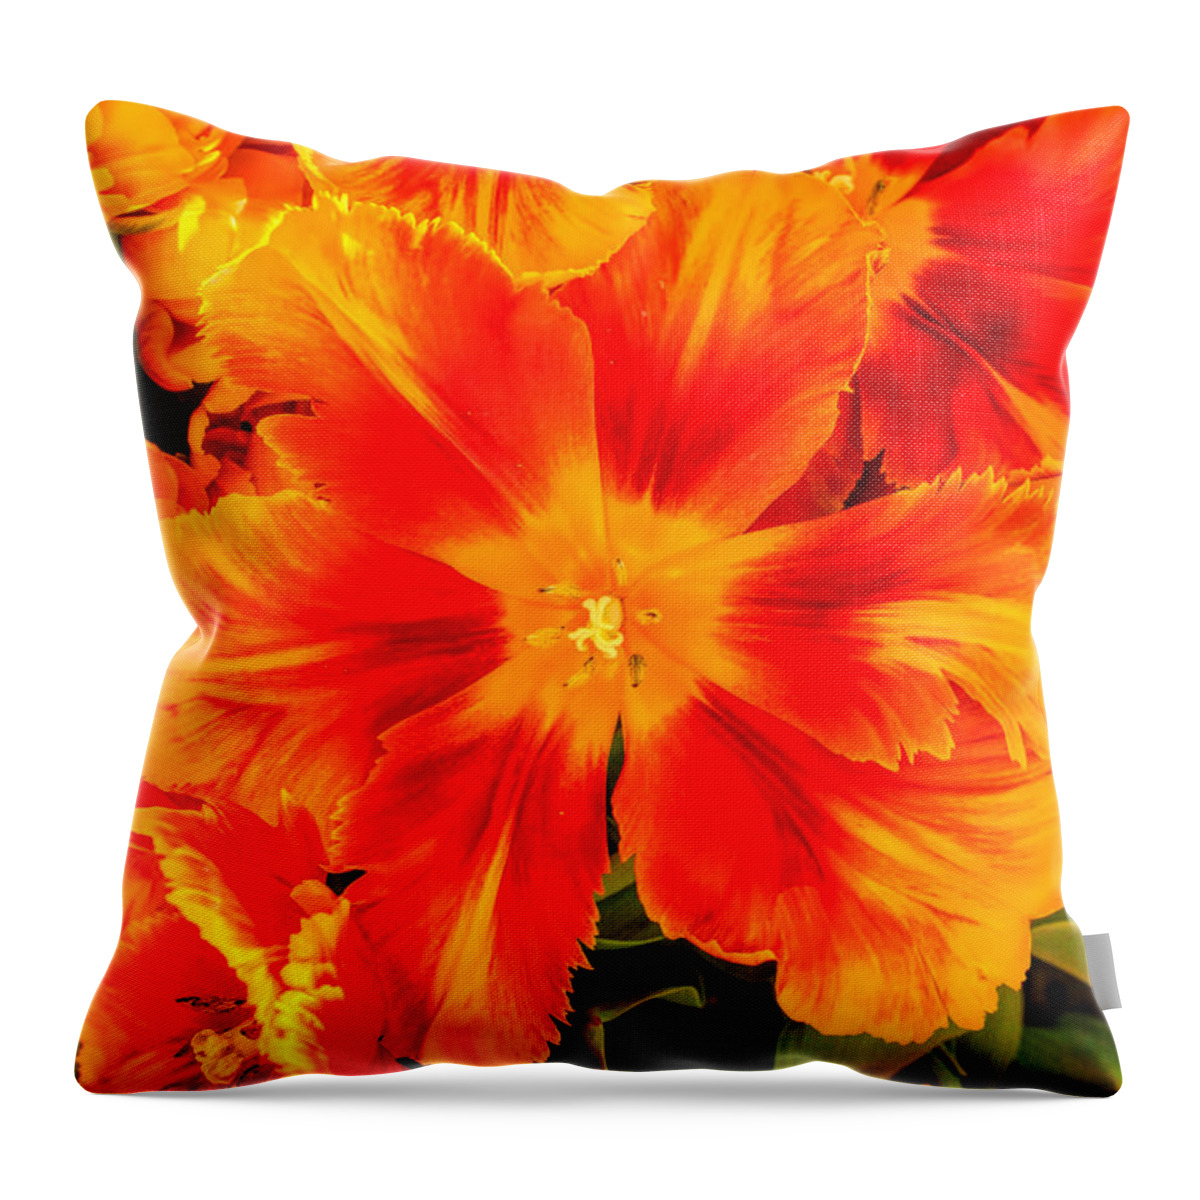 Botanical Gardens Throw Pillow featuring the photograph Orange Flames by Pat Cook